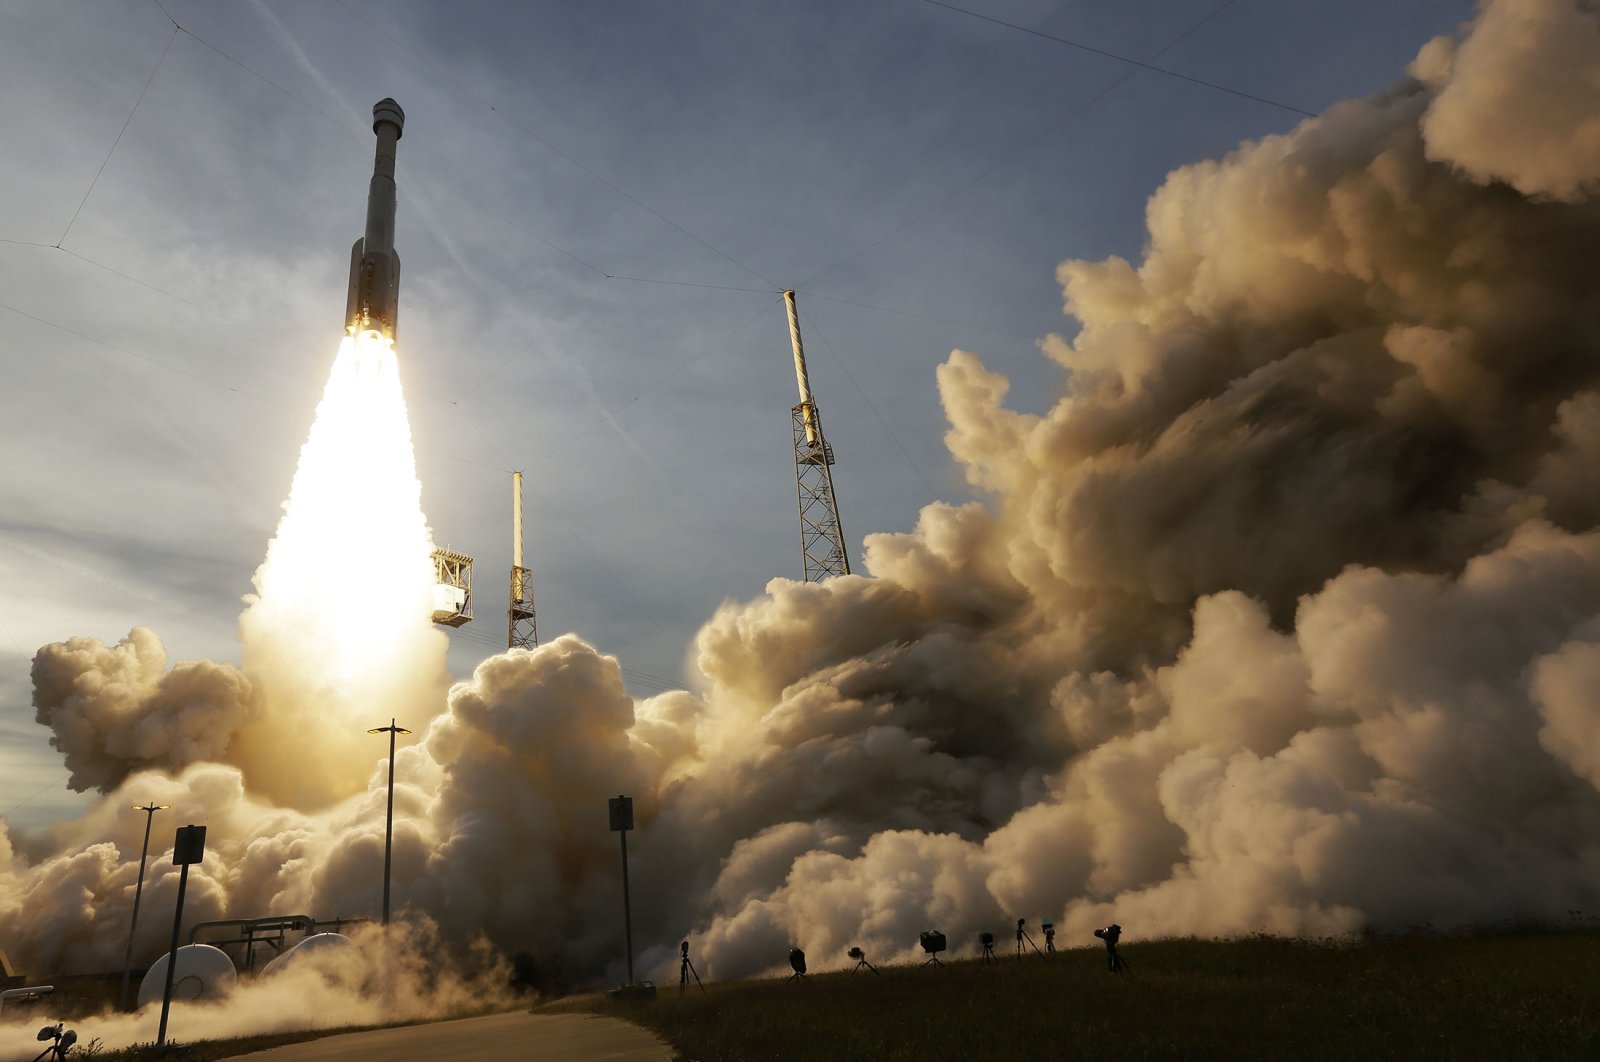 A United Launch Alliance Atlas V rocket carrying the Boeing Starliner crew capsule lifts off on a second test flight to the International Space Station from Space Launch Complex 41 at Cape Canaveral Space Force station in Cape Canaveral, Florida, U.S., May 19, 2022. (AP Photo)